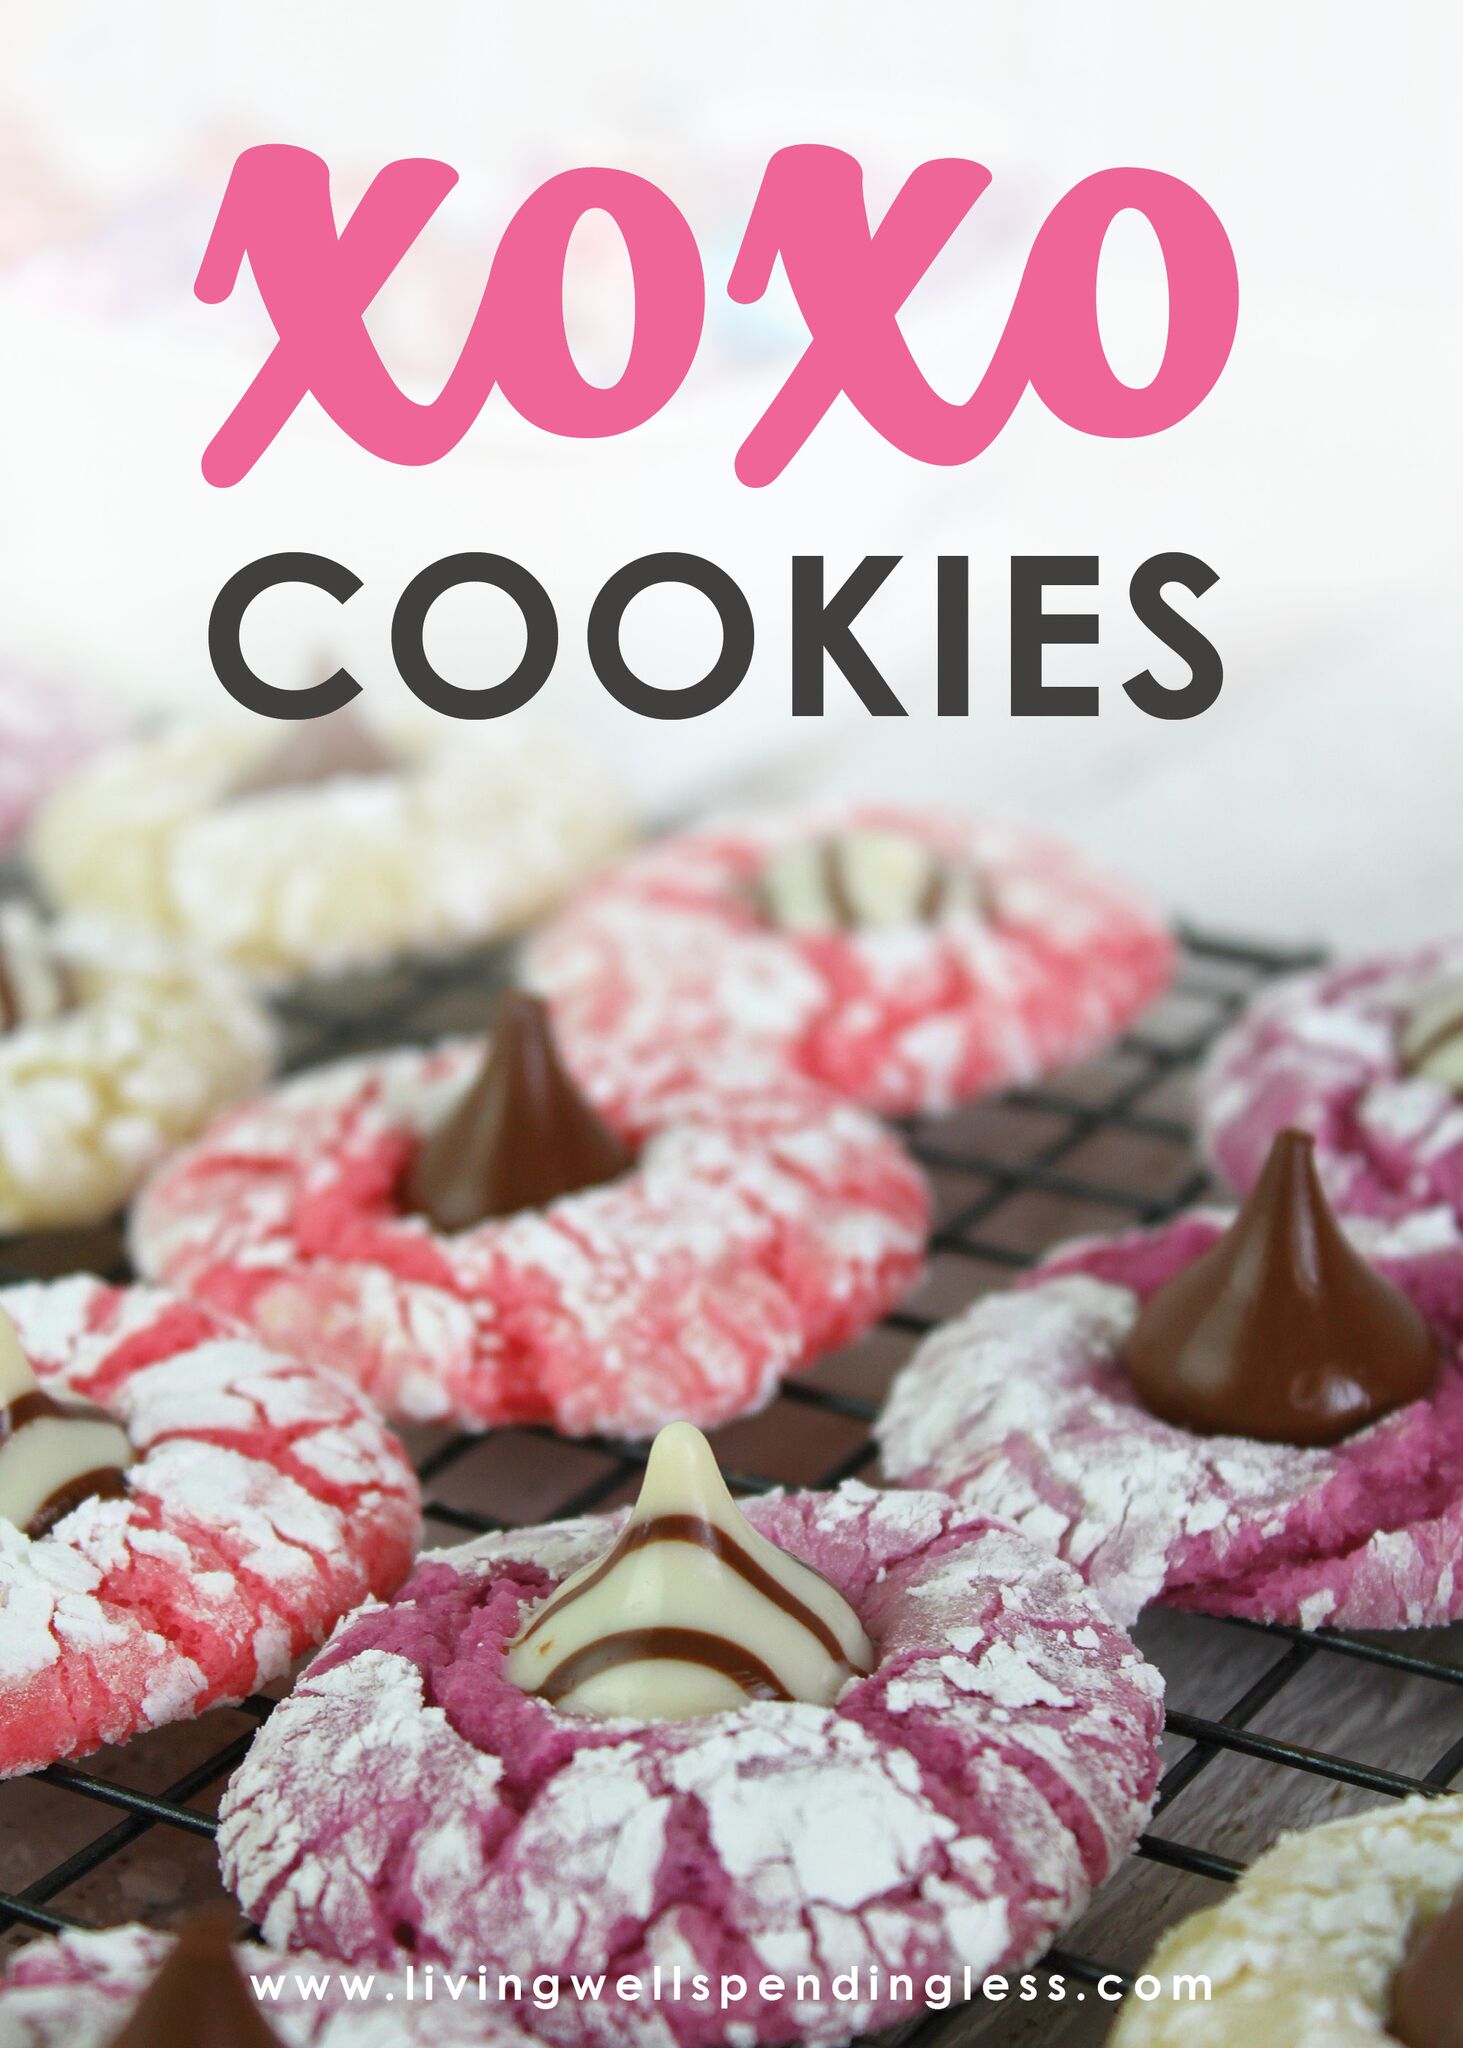 XOXO Cookies ⎢ Valentine Cake Batter Cookies ⎢ Quick and Simple Dessert Recipe ⎢ Valentine’s Day ⎢ Classroom Party ⎢ Last Minute Meal ⎢ Food Made Simple ⎢ Best Valentine's Day Cookies